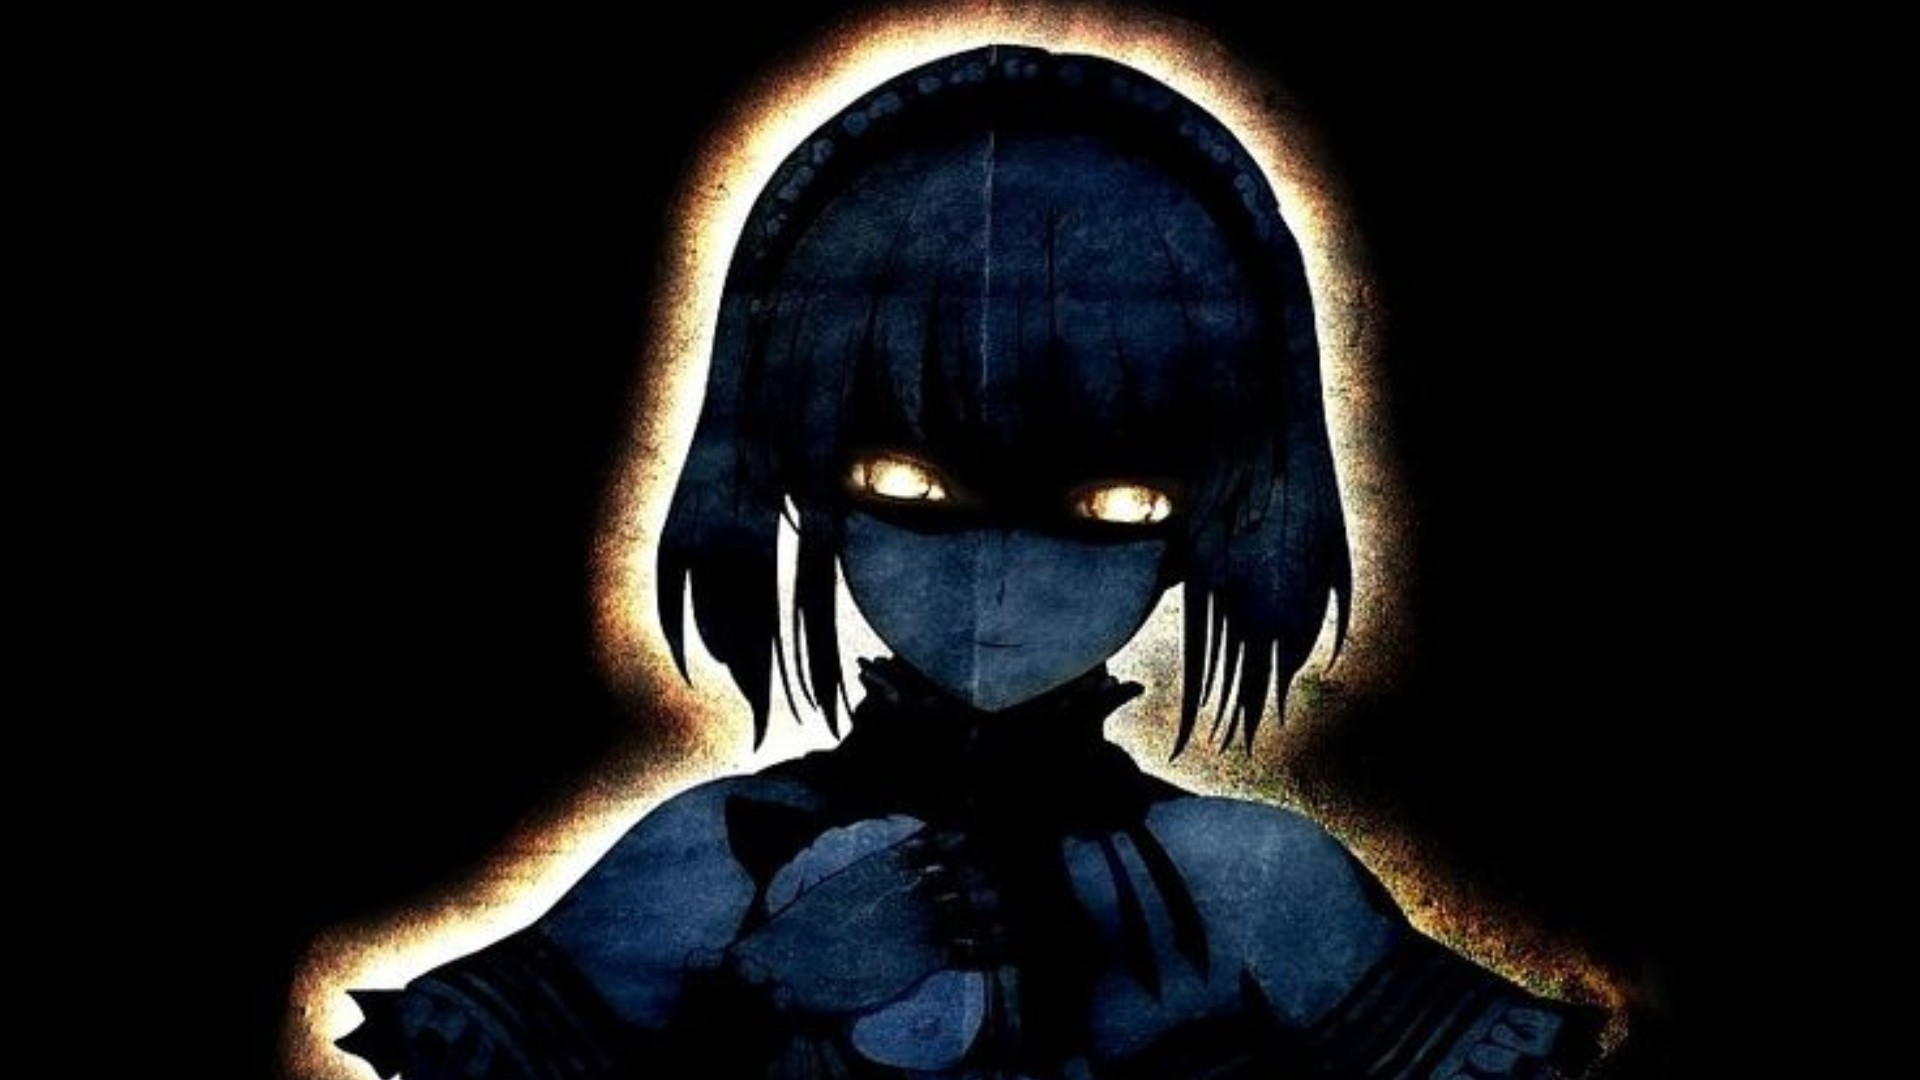 Horror Anime Wallpapers - Top 30 Best Horror Anime Wallpapers Download